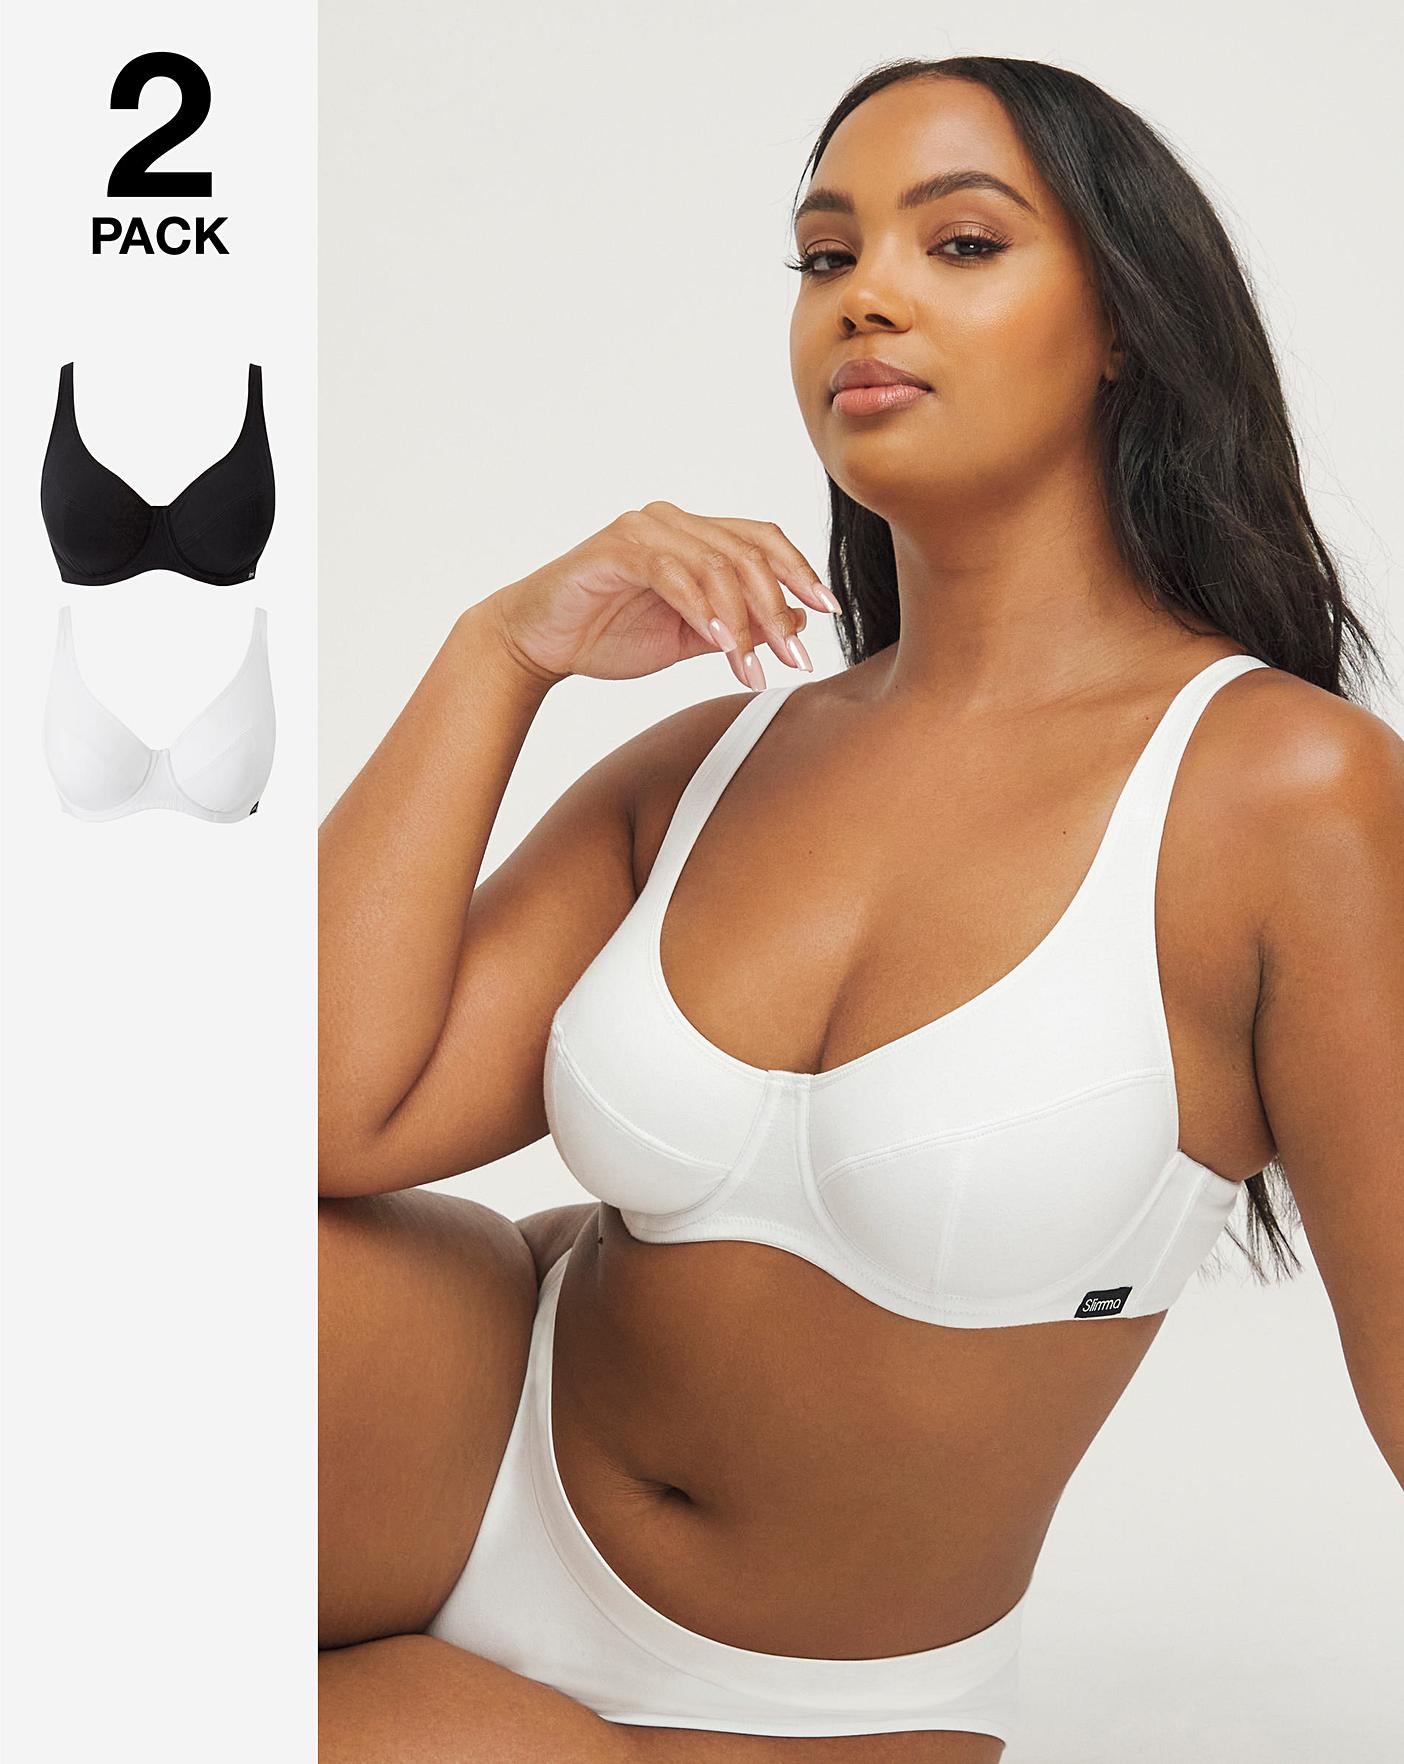 Buy Black/White Cotton Rich Bandeau Bras 2 Pack from the Next UK